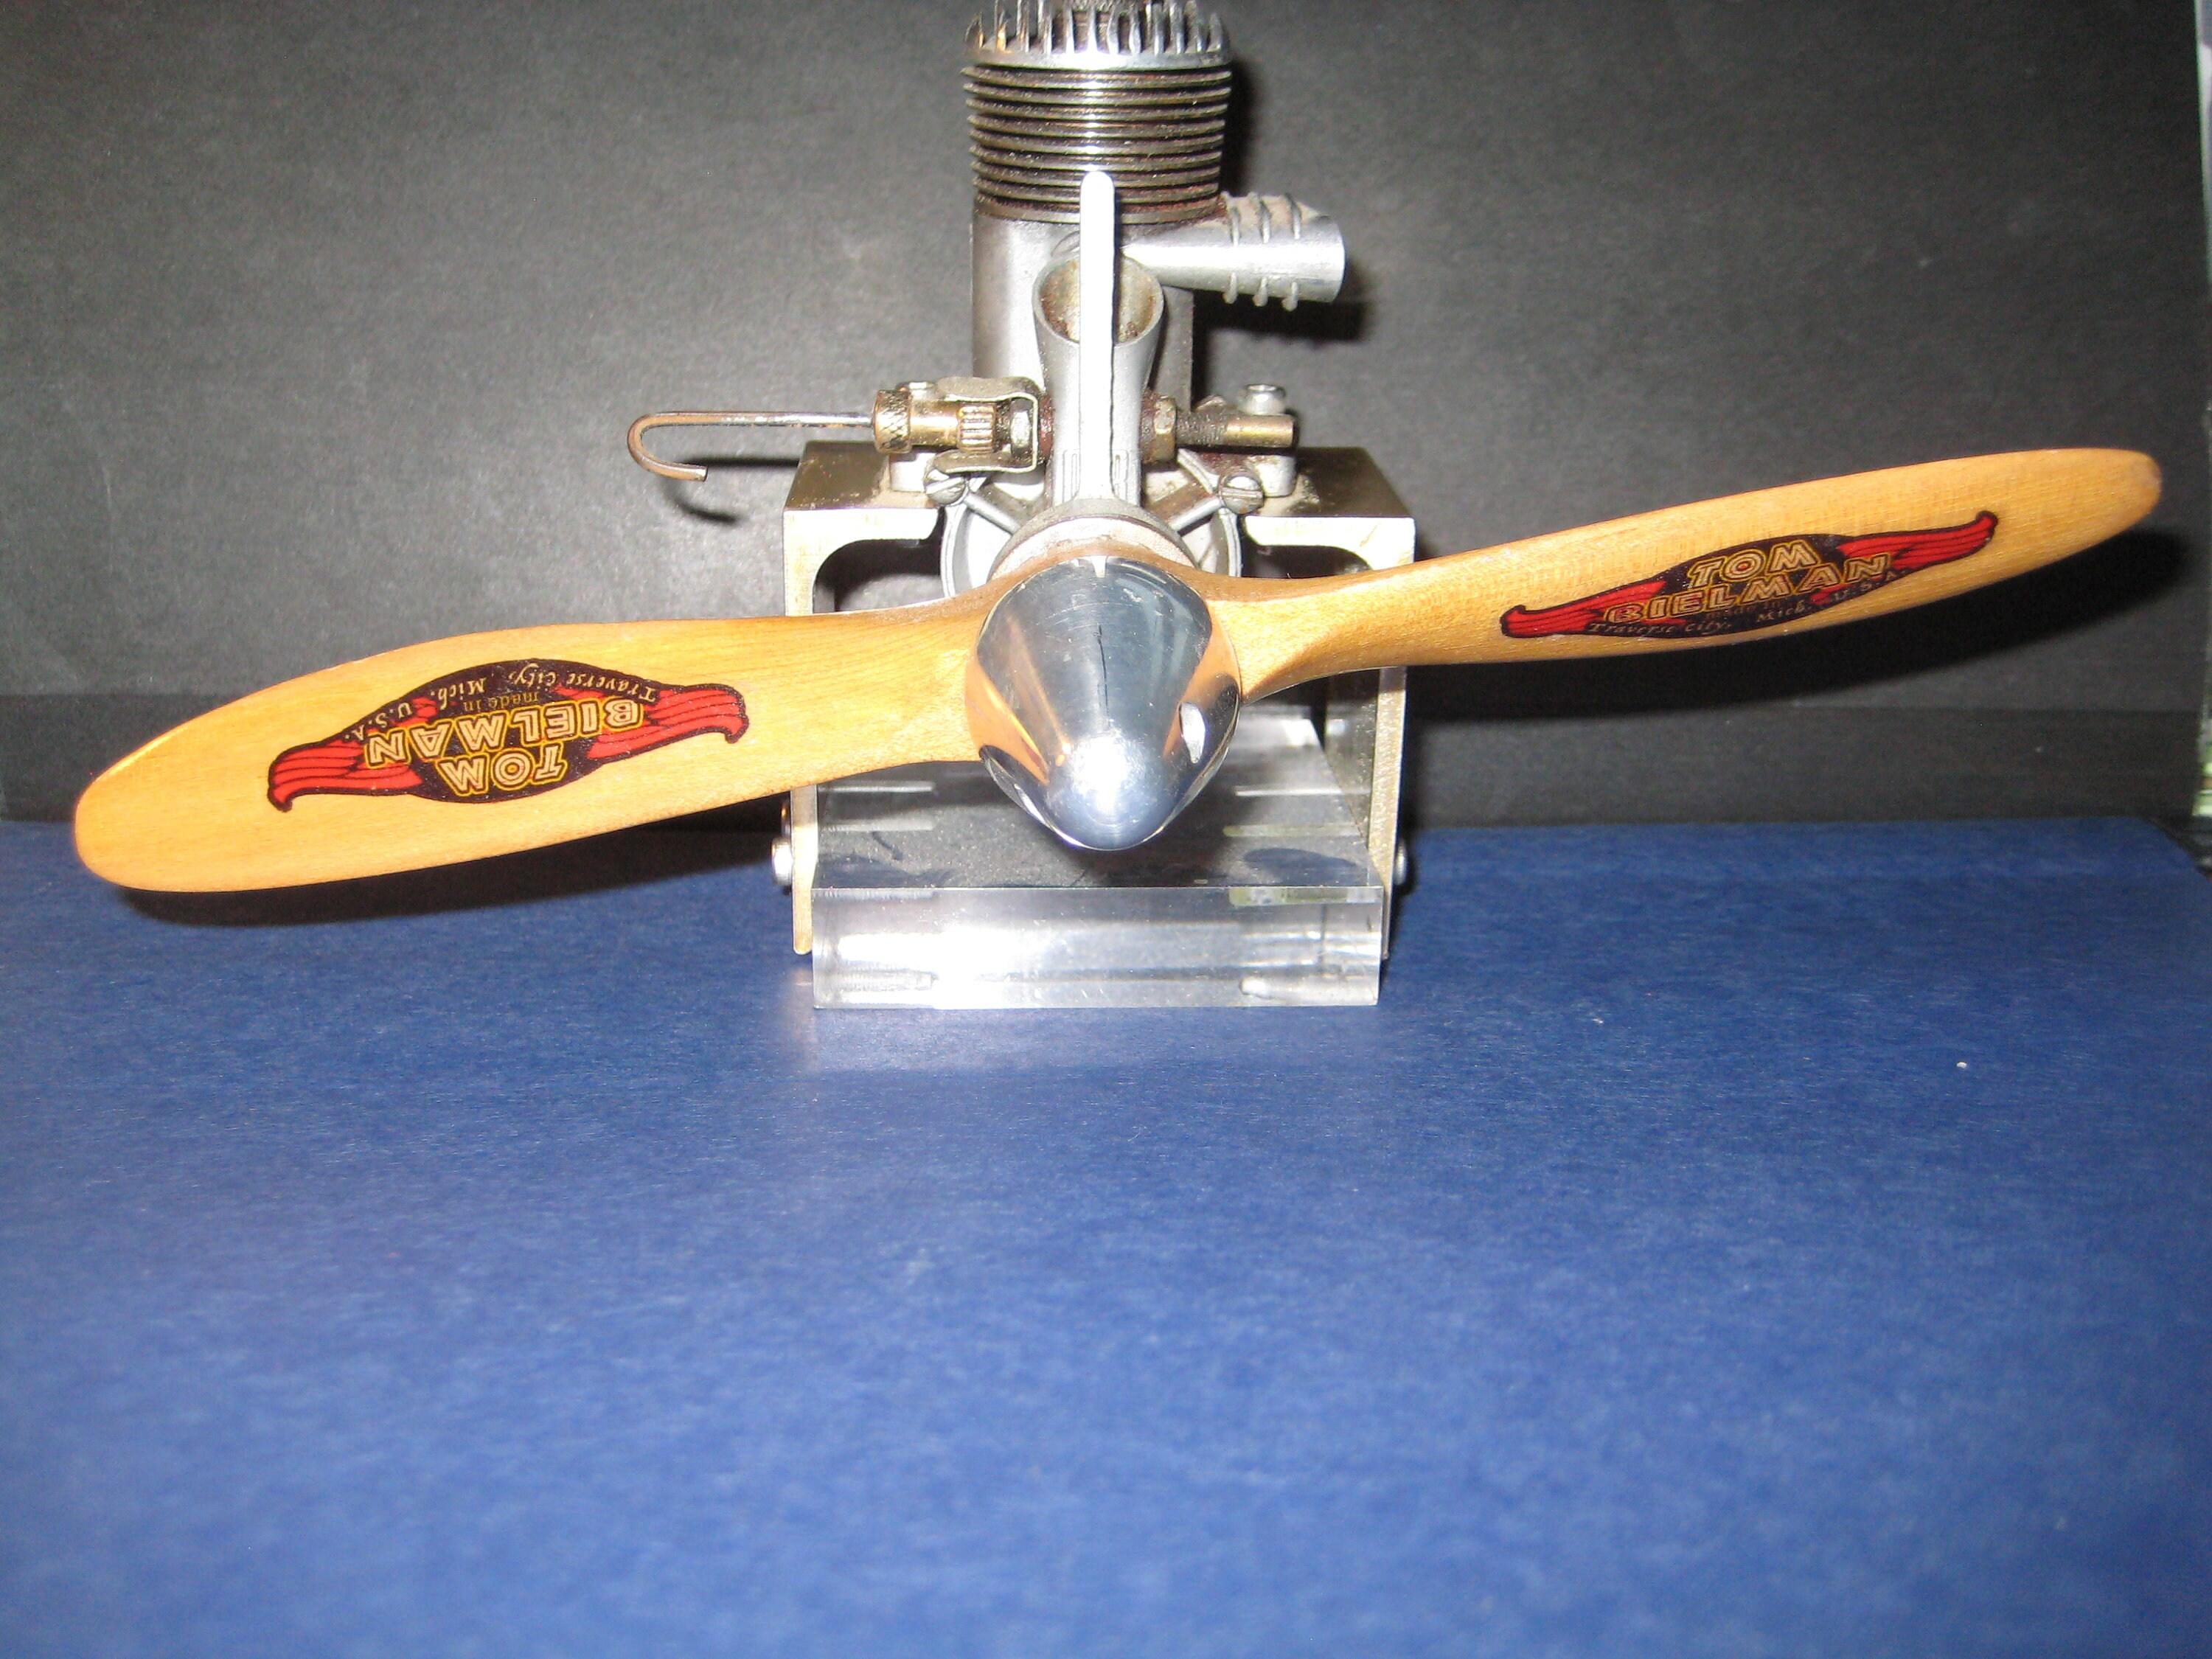 Vintage Model Aircraft Engines For Sale: Vintage Model Aircraft Engines Offer More Than Just Functional Use